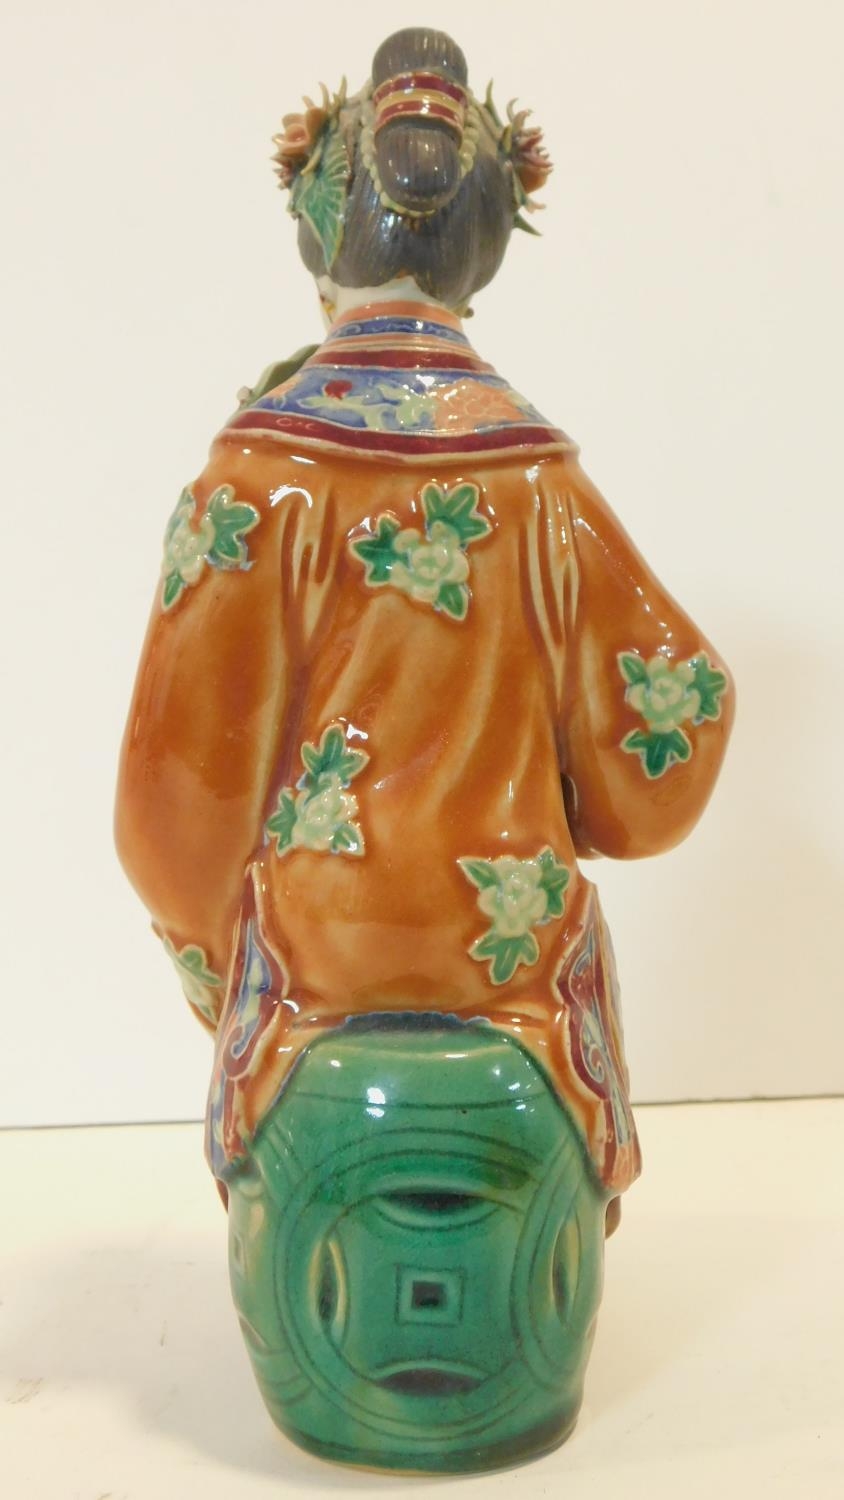 A Japanese ceramic figure of a lady sitting on a garden seat in polychrome hand painted decoration - Image 6 of 8